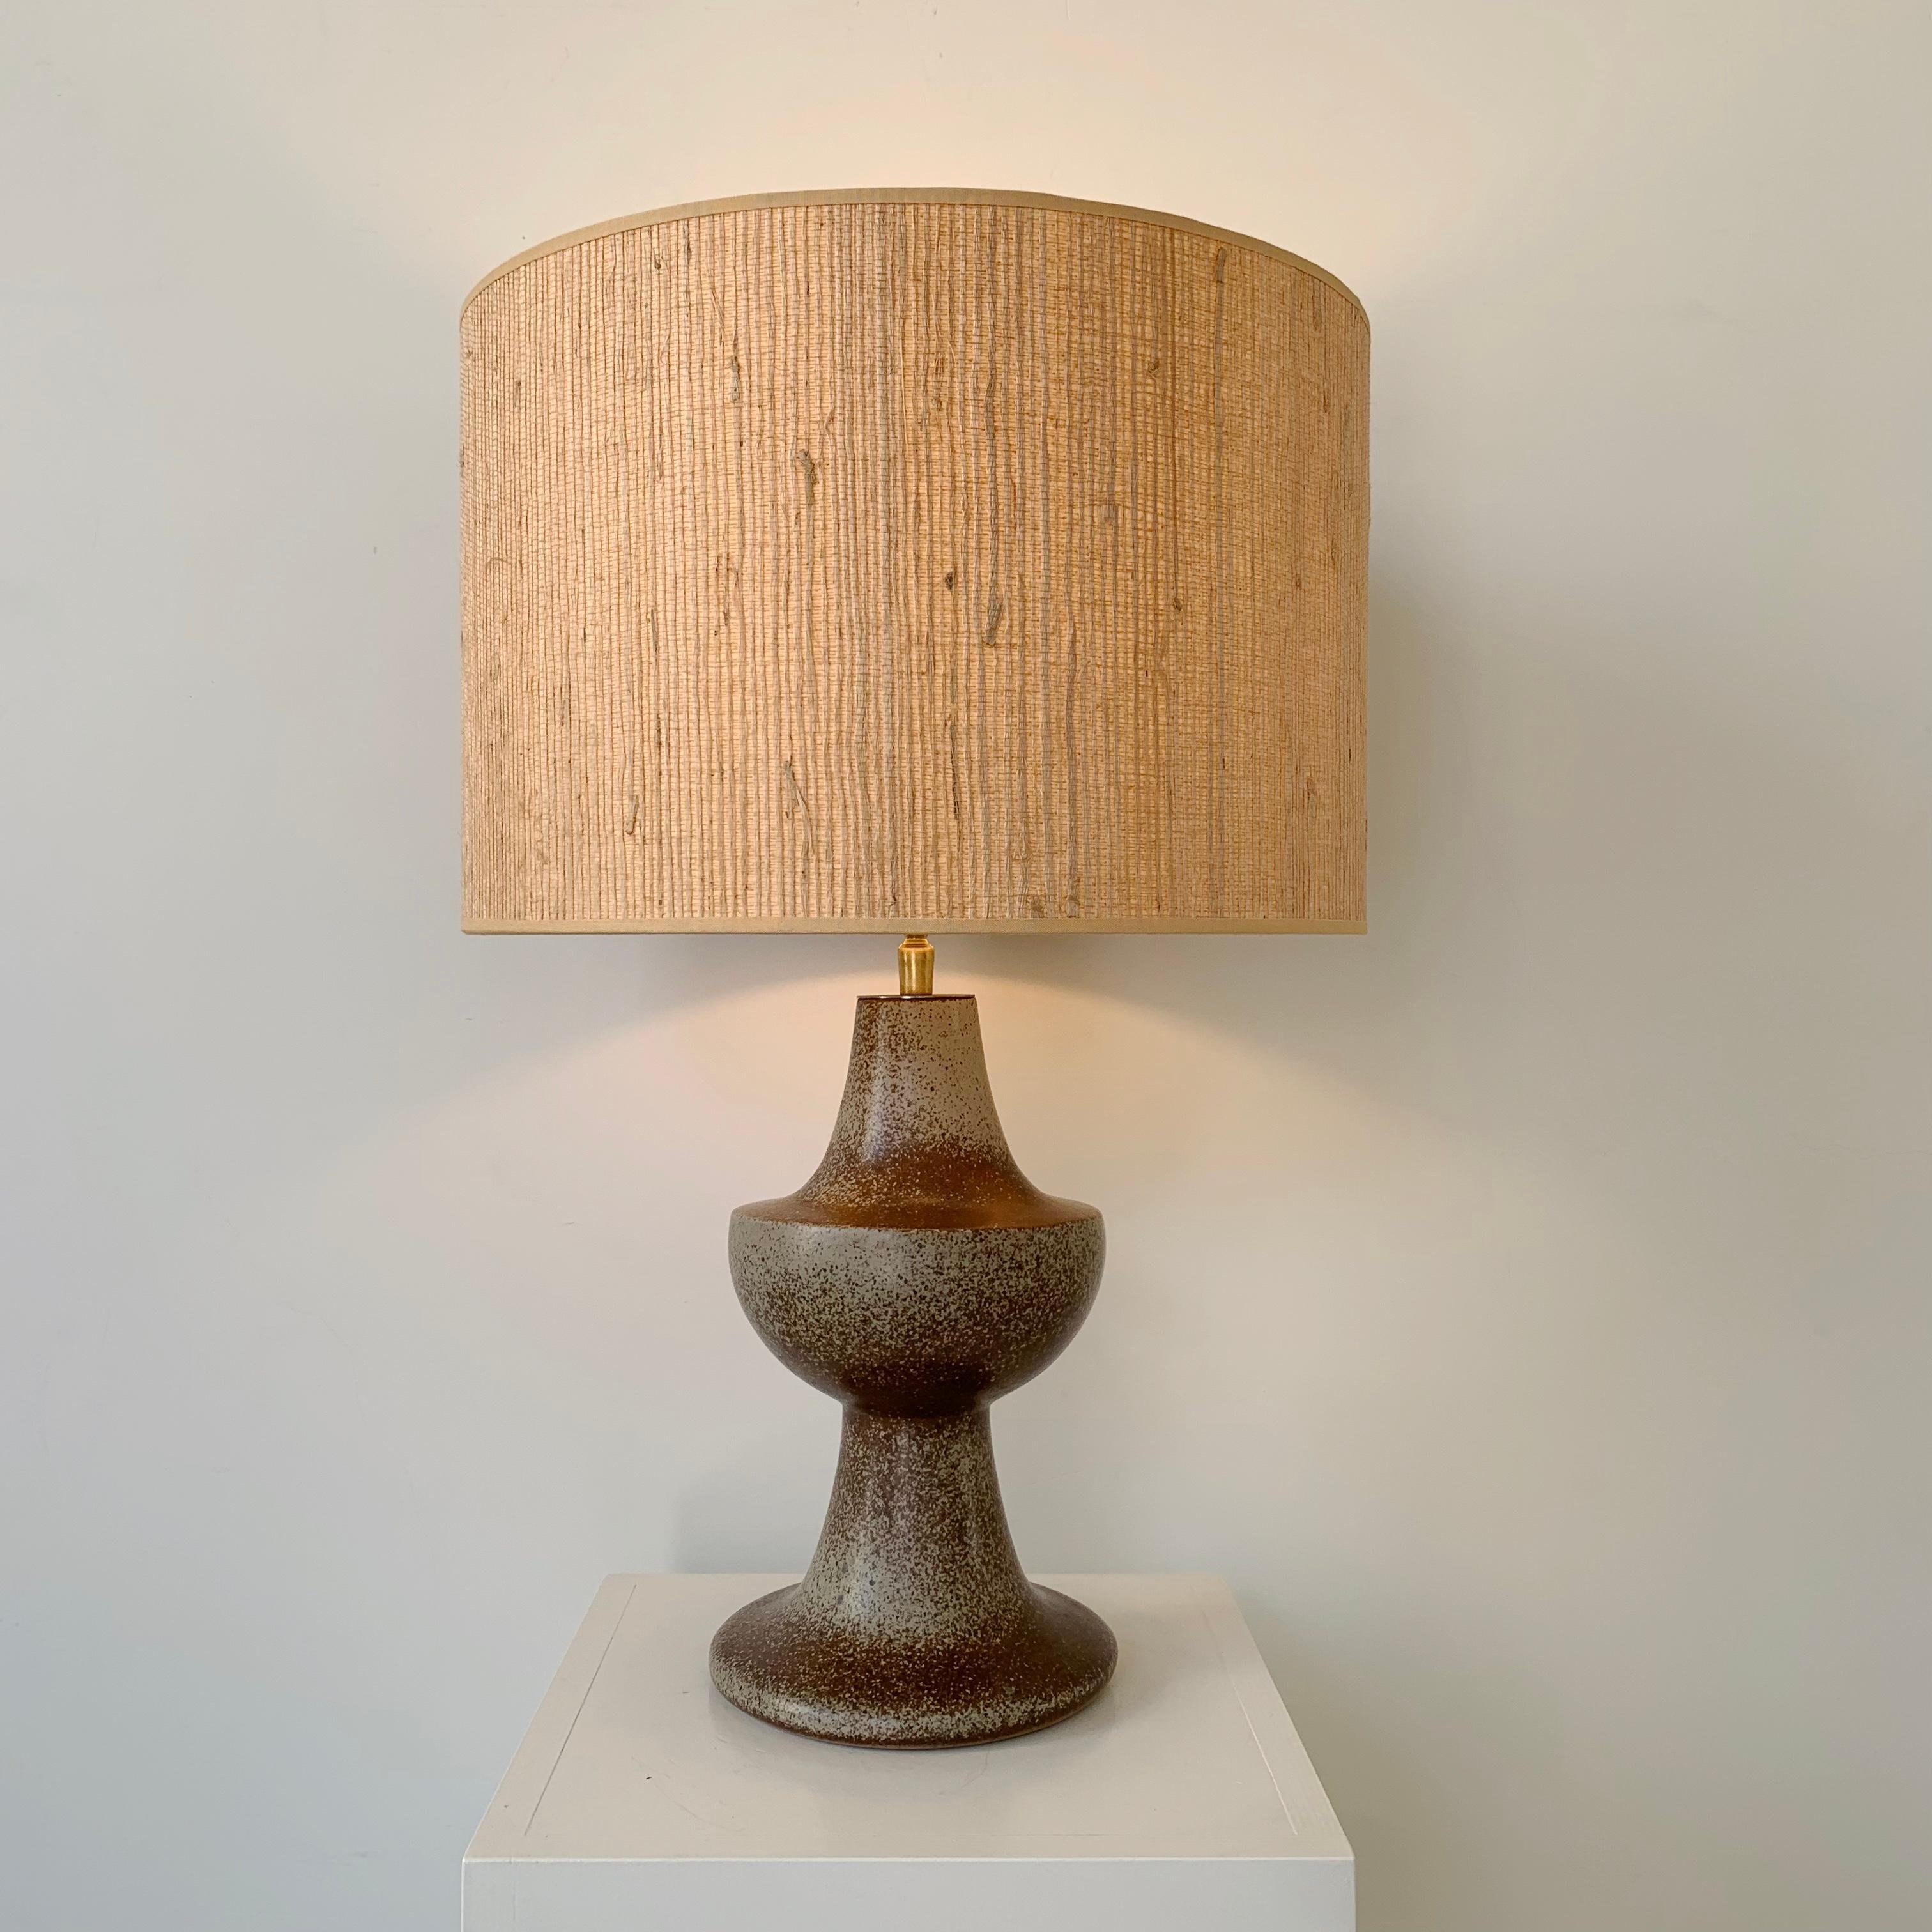 Midcentury ceramic table lamp, circa 1960, France.
Enameled sandstone, new straw shade.
Rewired, one E27 bulb.
Dimensions: total height: 56 cm, Diamter of the shade37 cm.
Good condition.
All purchases are covered by our Buyer Protection